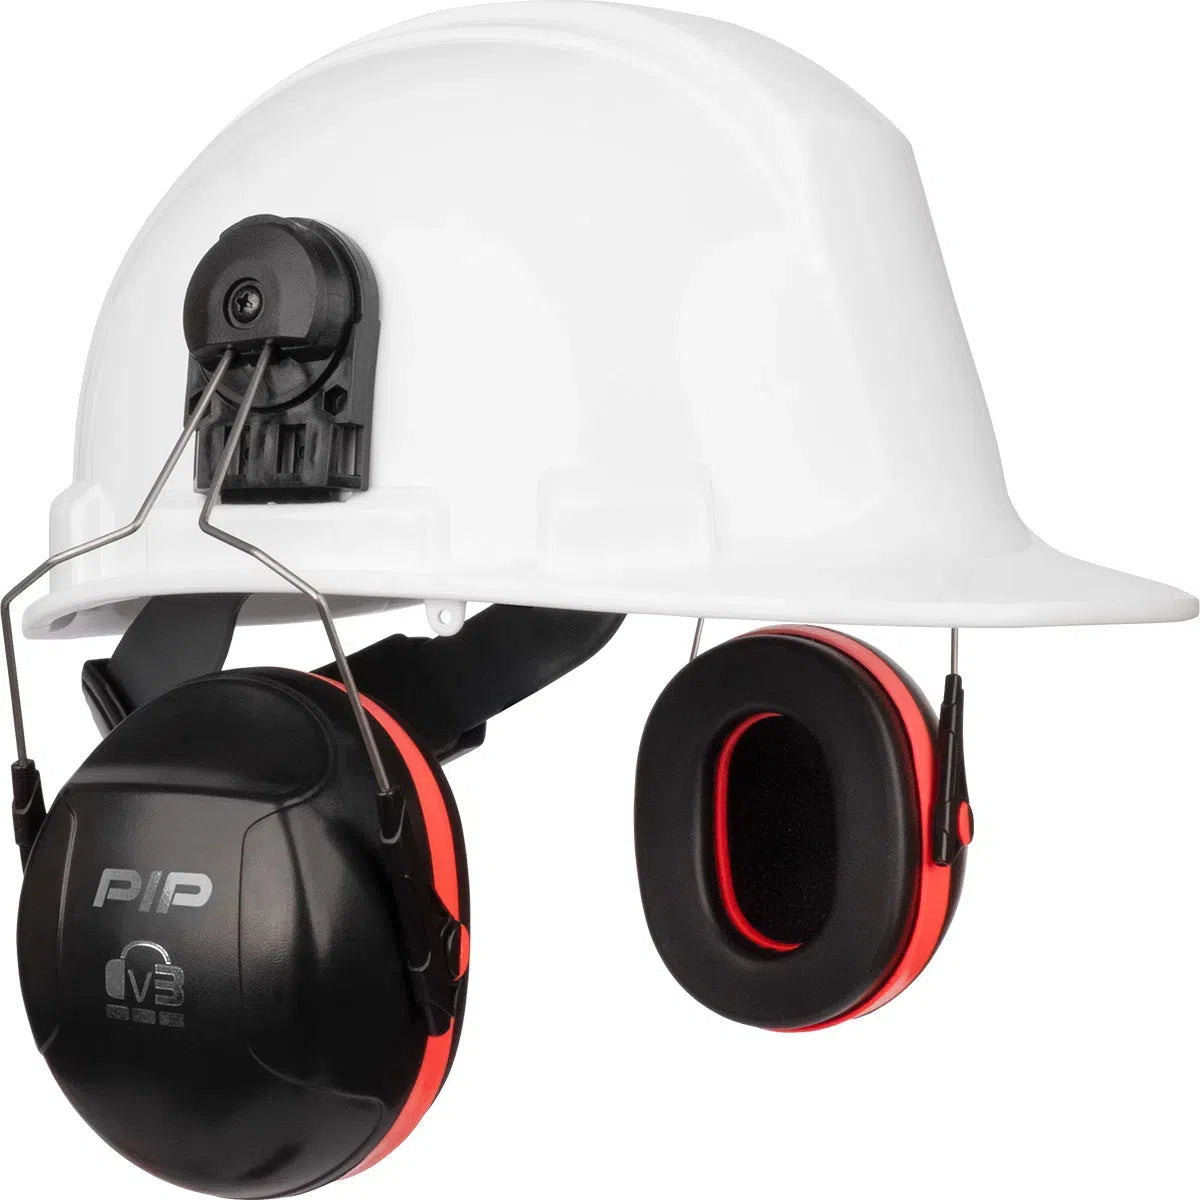 PIP Hearing protector for helmets - 26dB